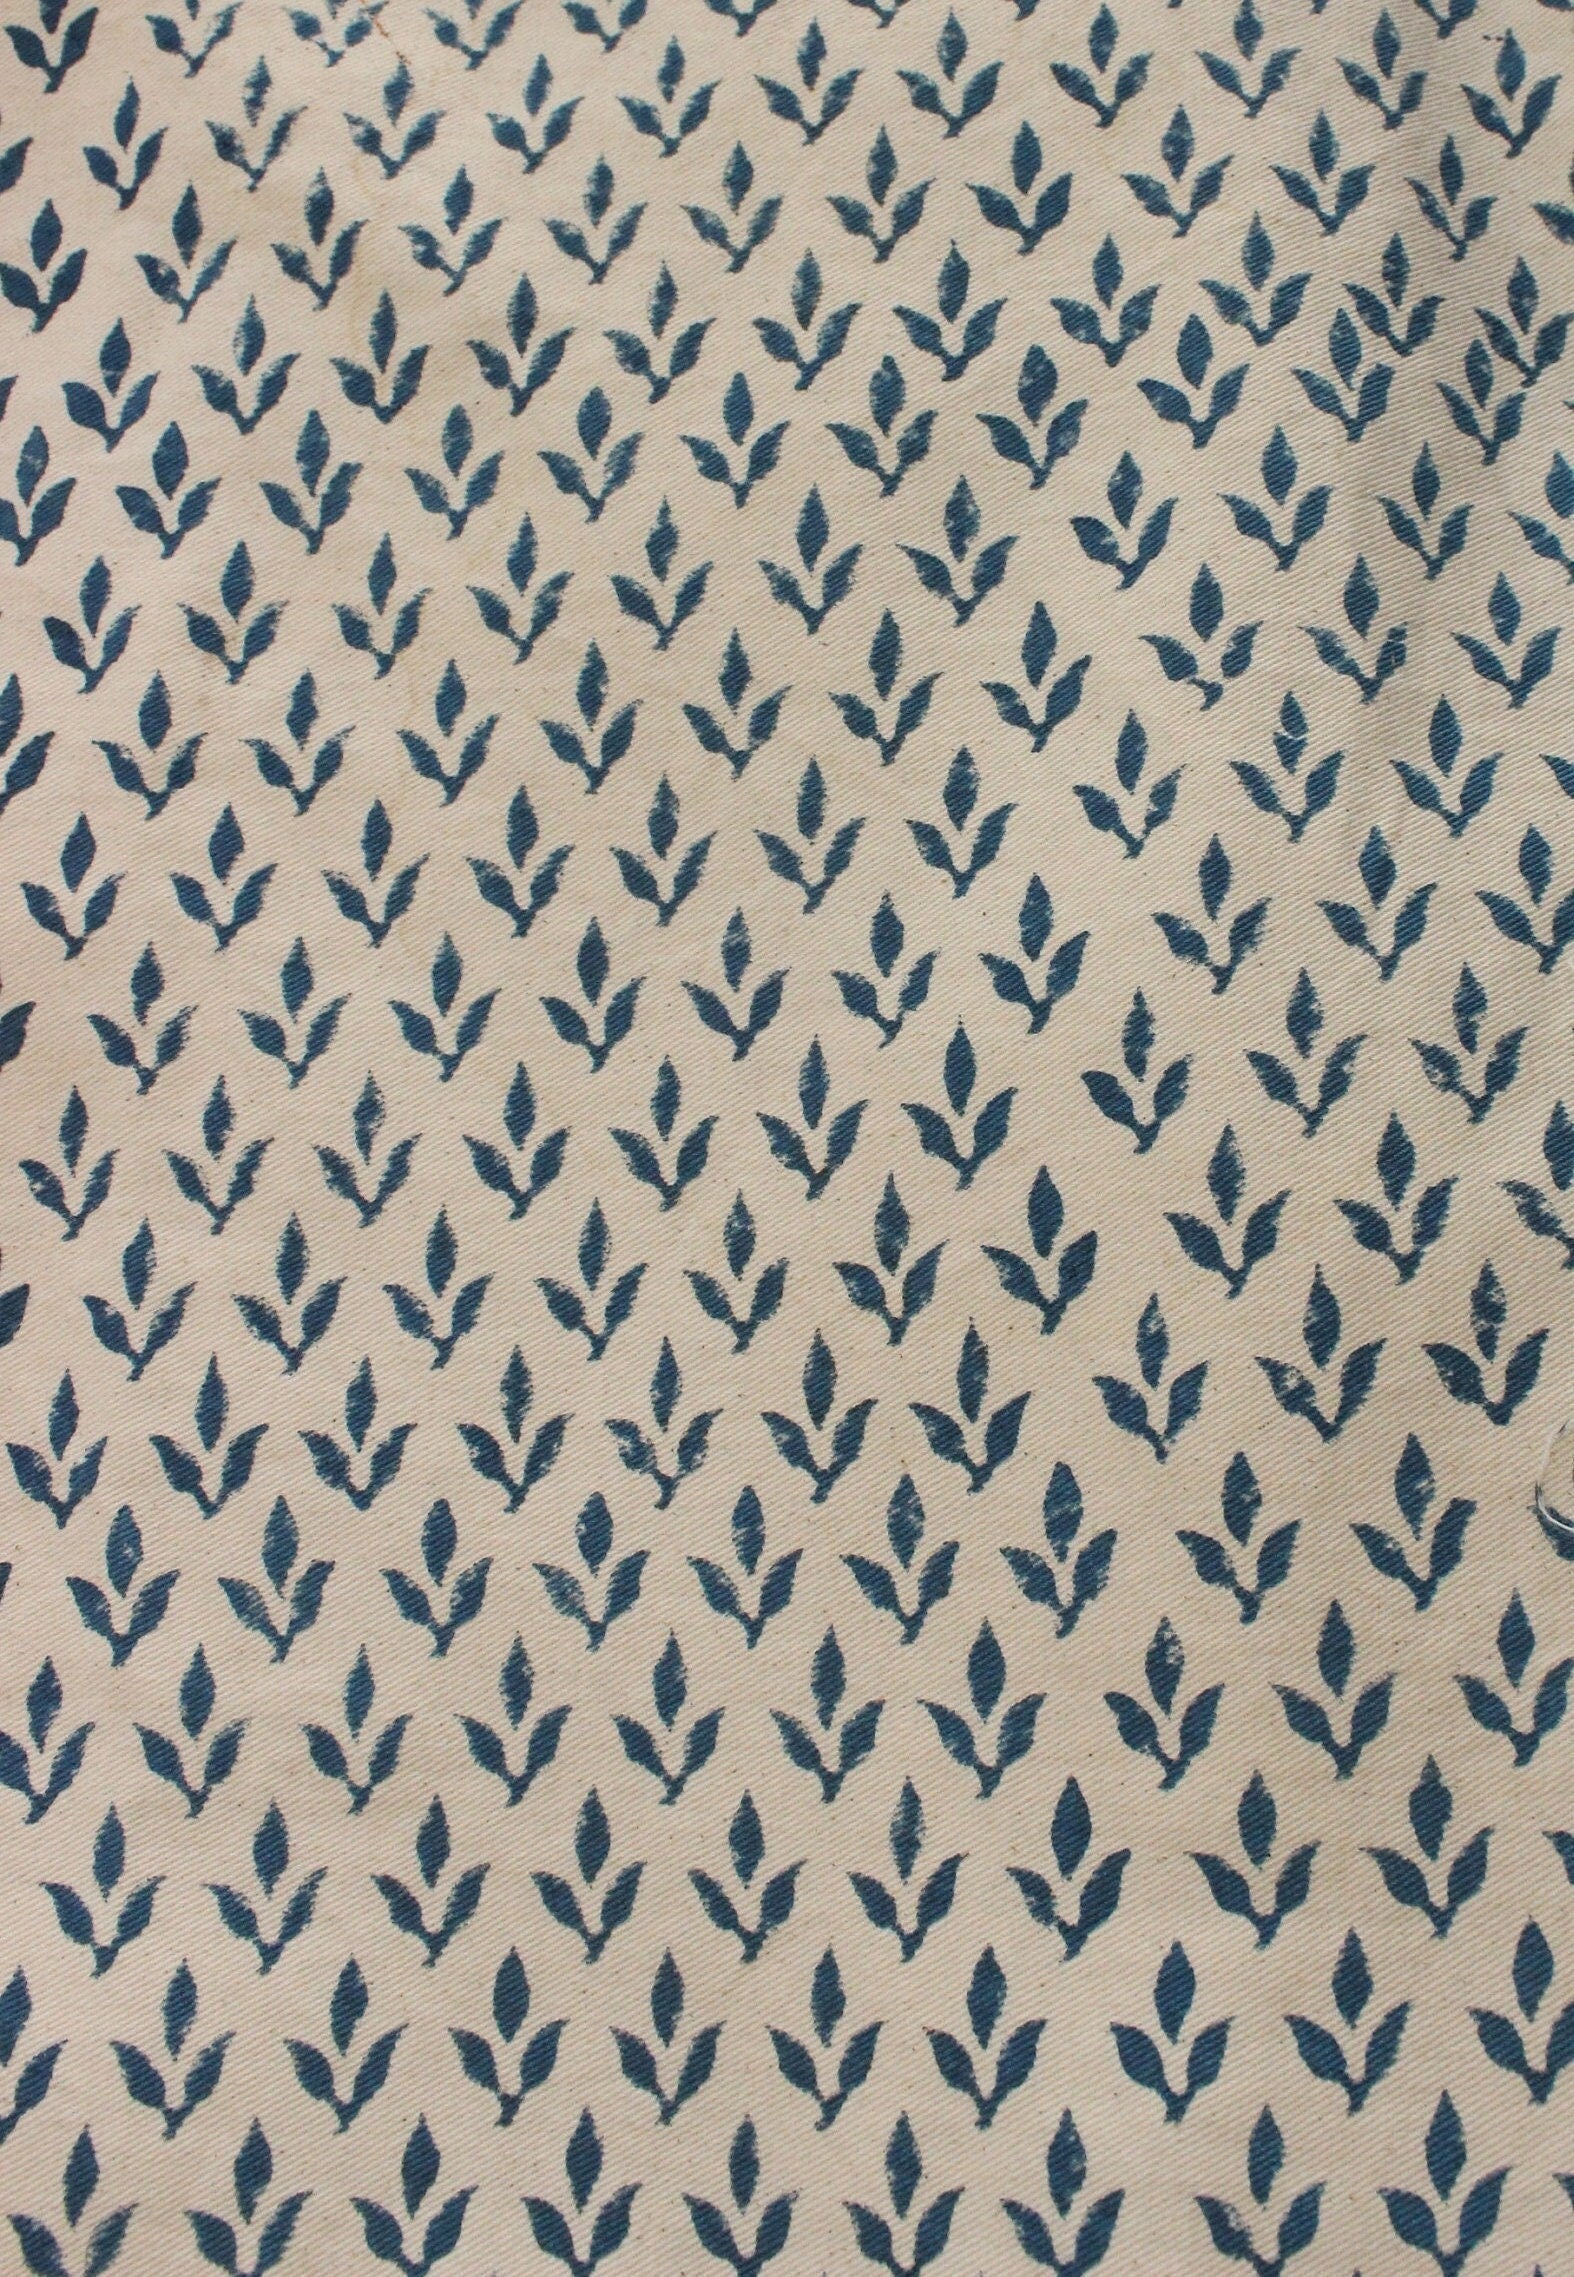 Diya Bati  Beige Blue Block Print Fabric, Indian Linen Fabric, Buy Fabric By The Yard Handmade Upholstery Fabric Linen For Chair And Sofa